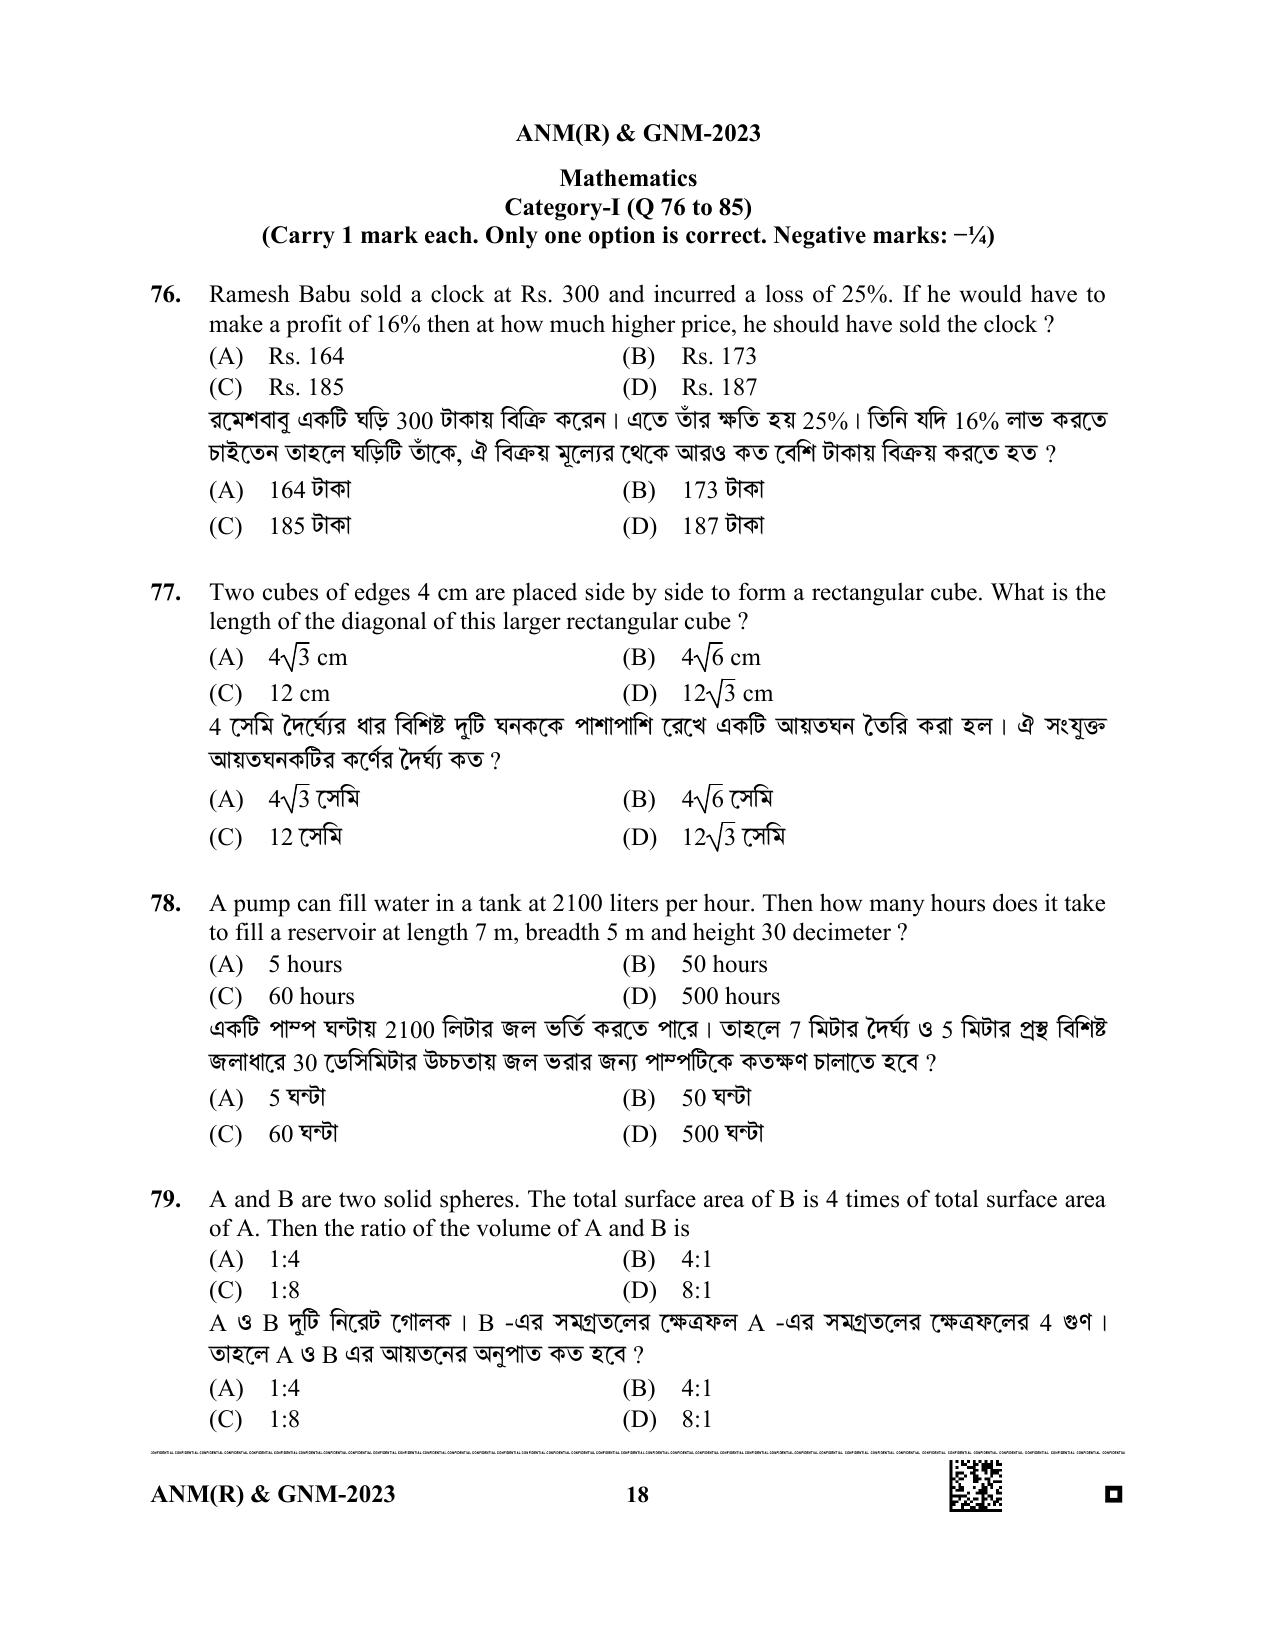 WB ANM GNM 2023 Question Paper - Page 18